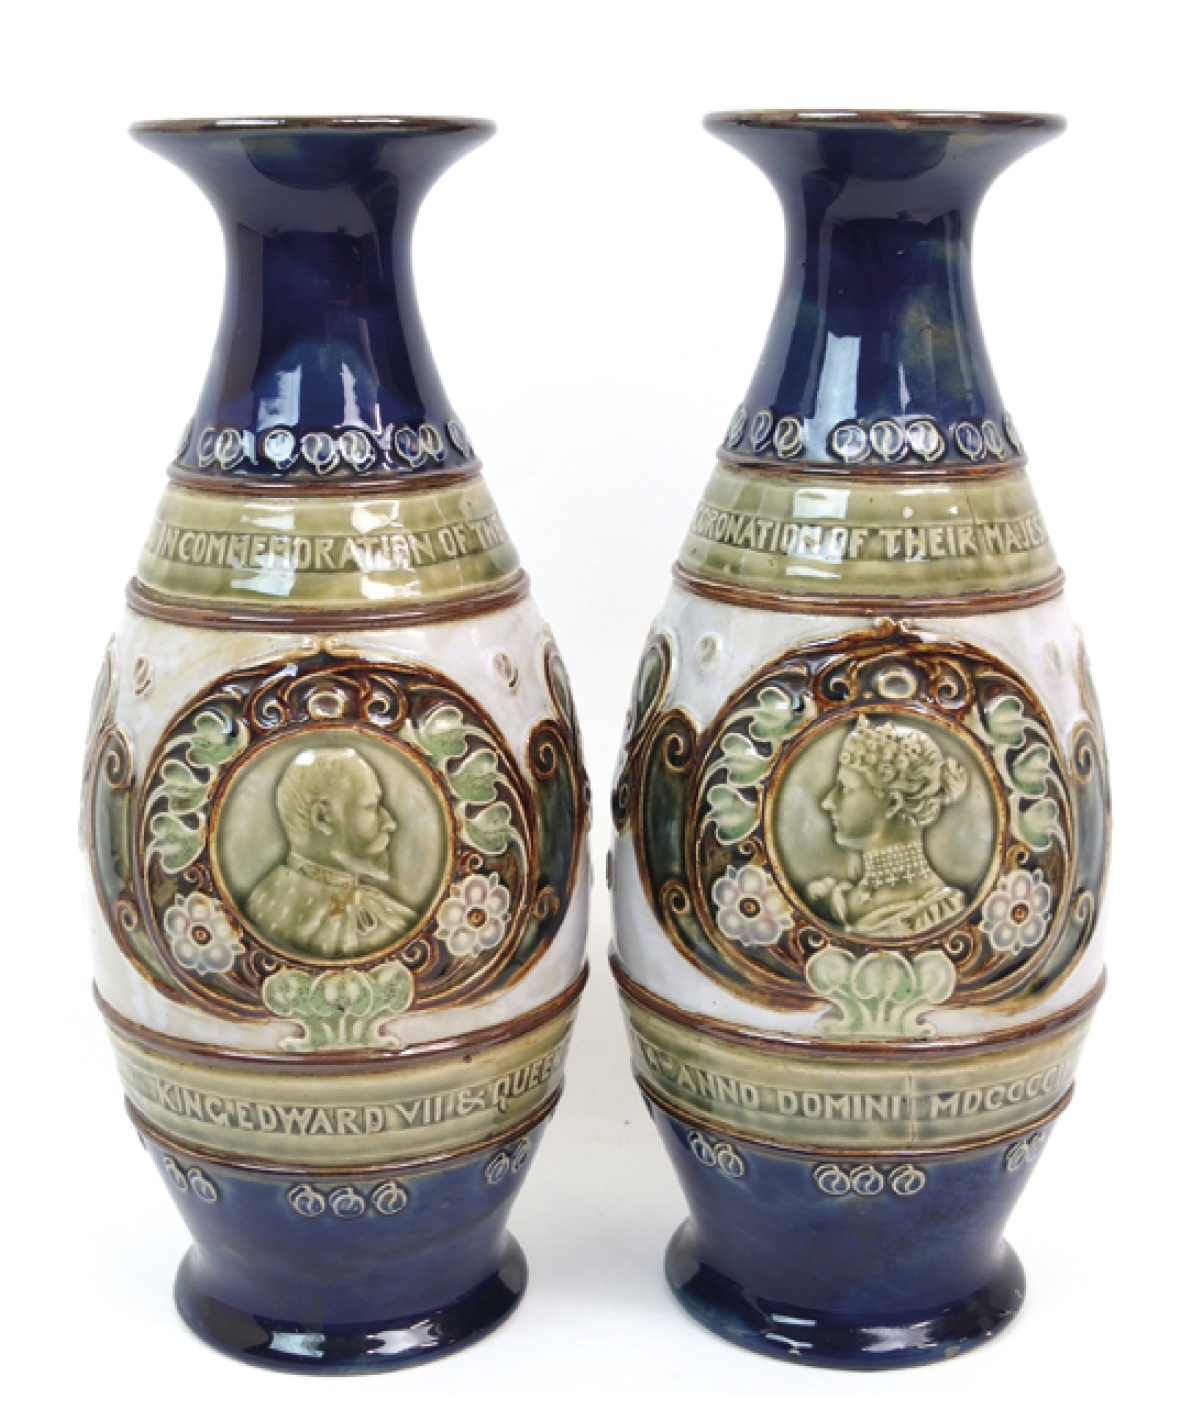 A pair of Royal Doulton vases for the coronation of Edward VII dated to 1902